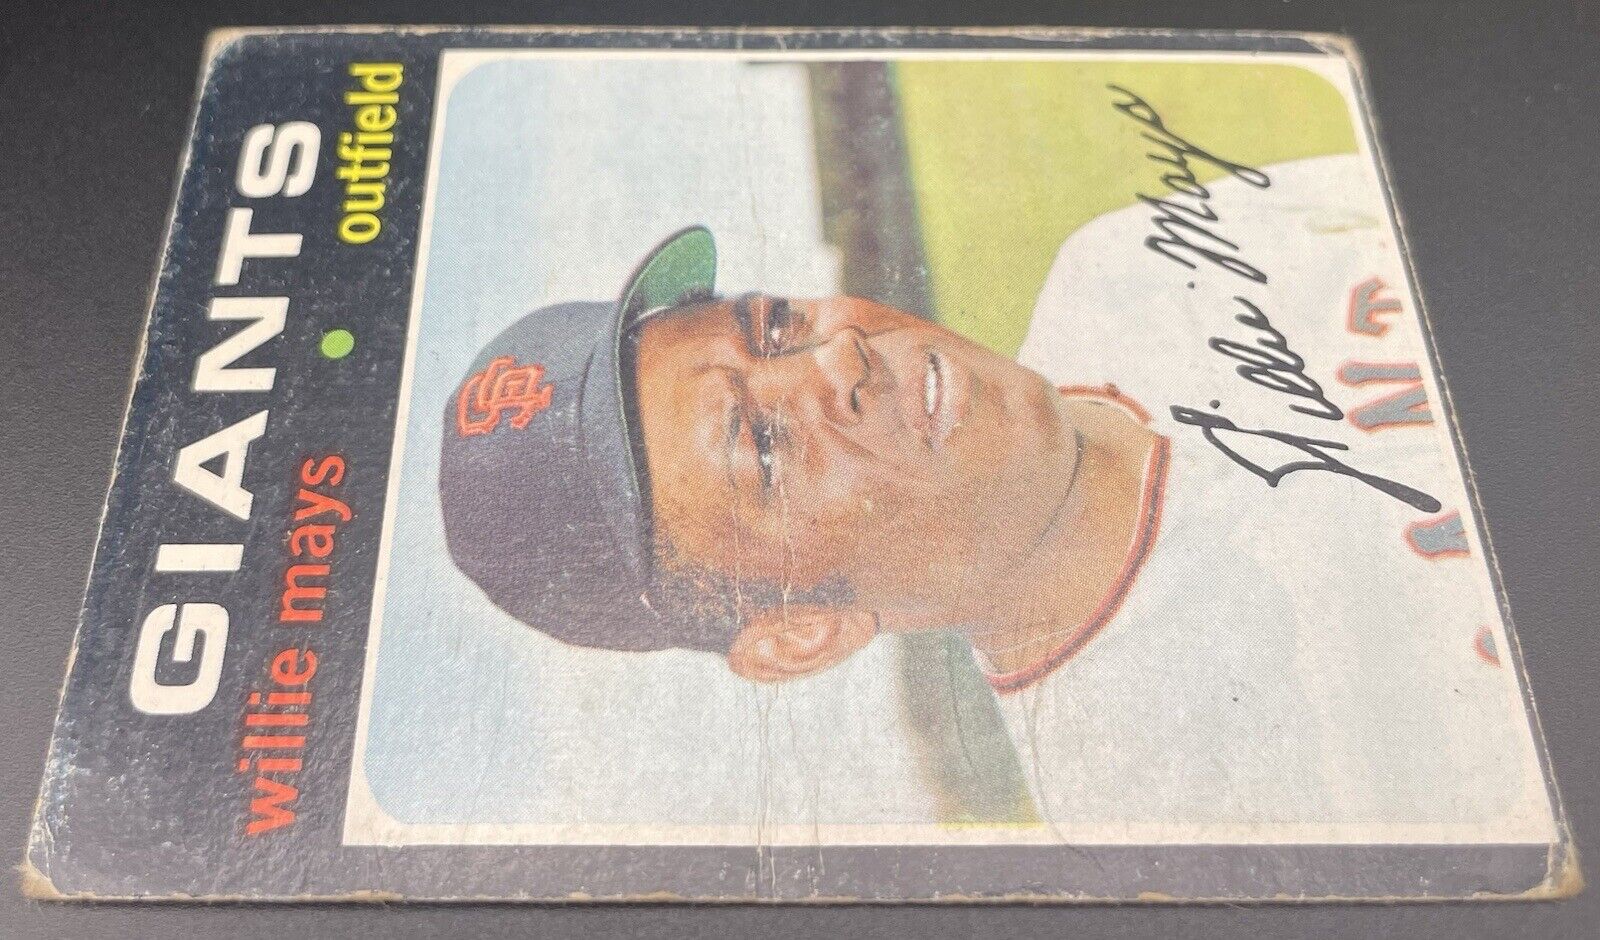 Willie Mays 1971 Topps #600 San Francisco Giants 